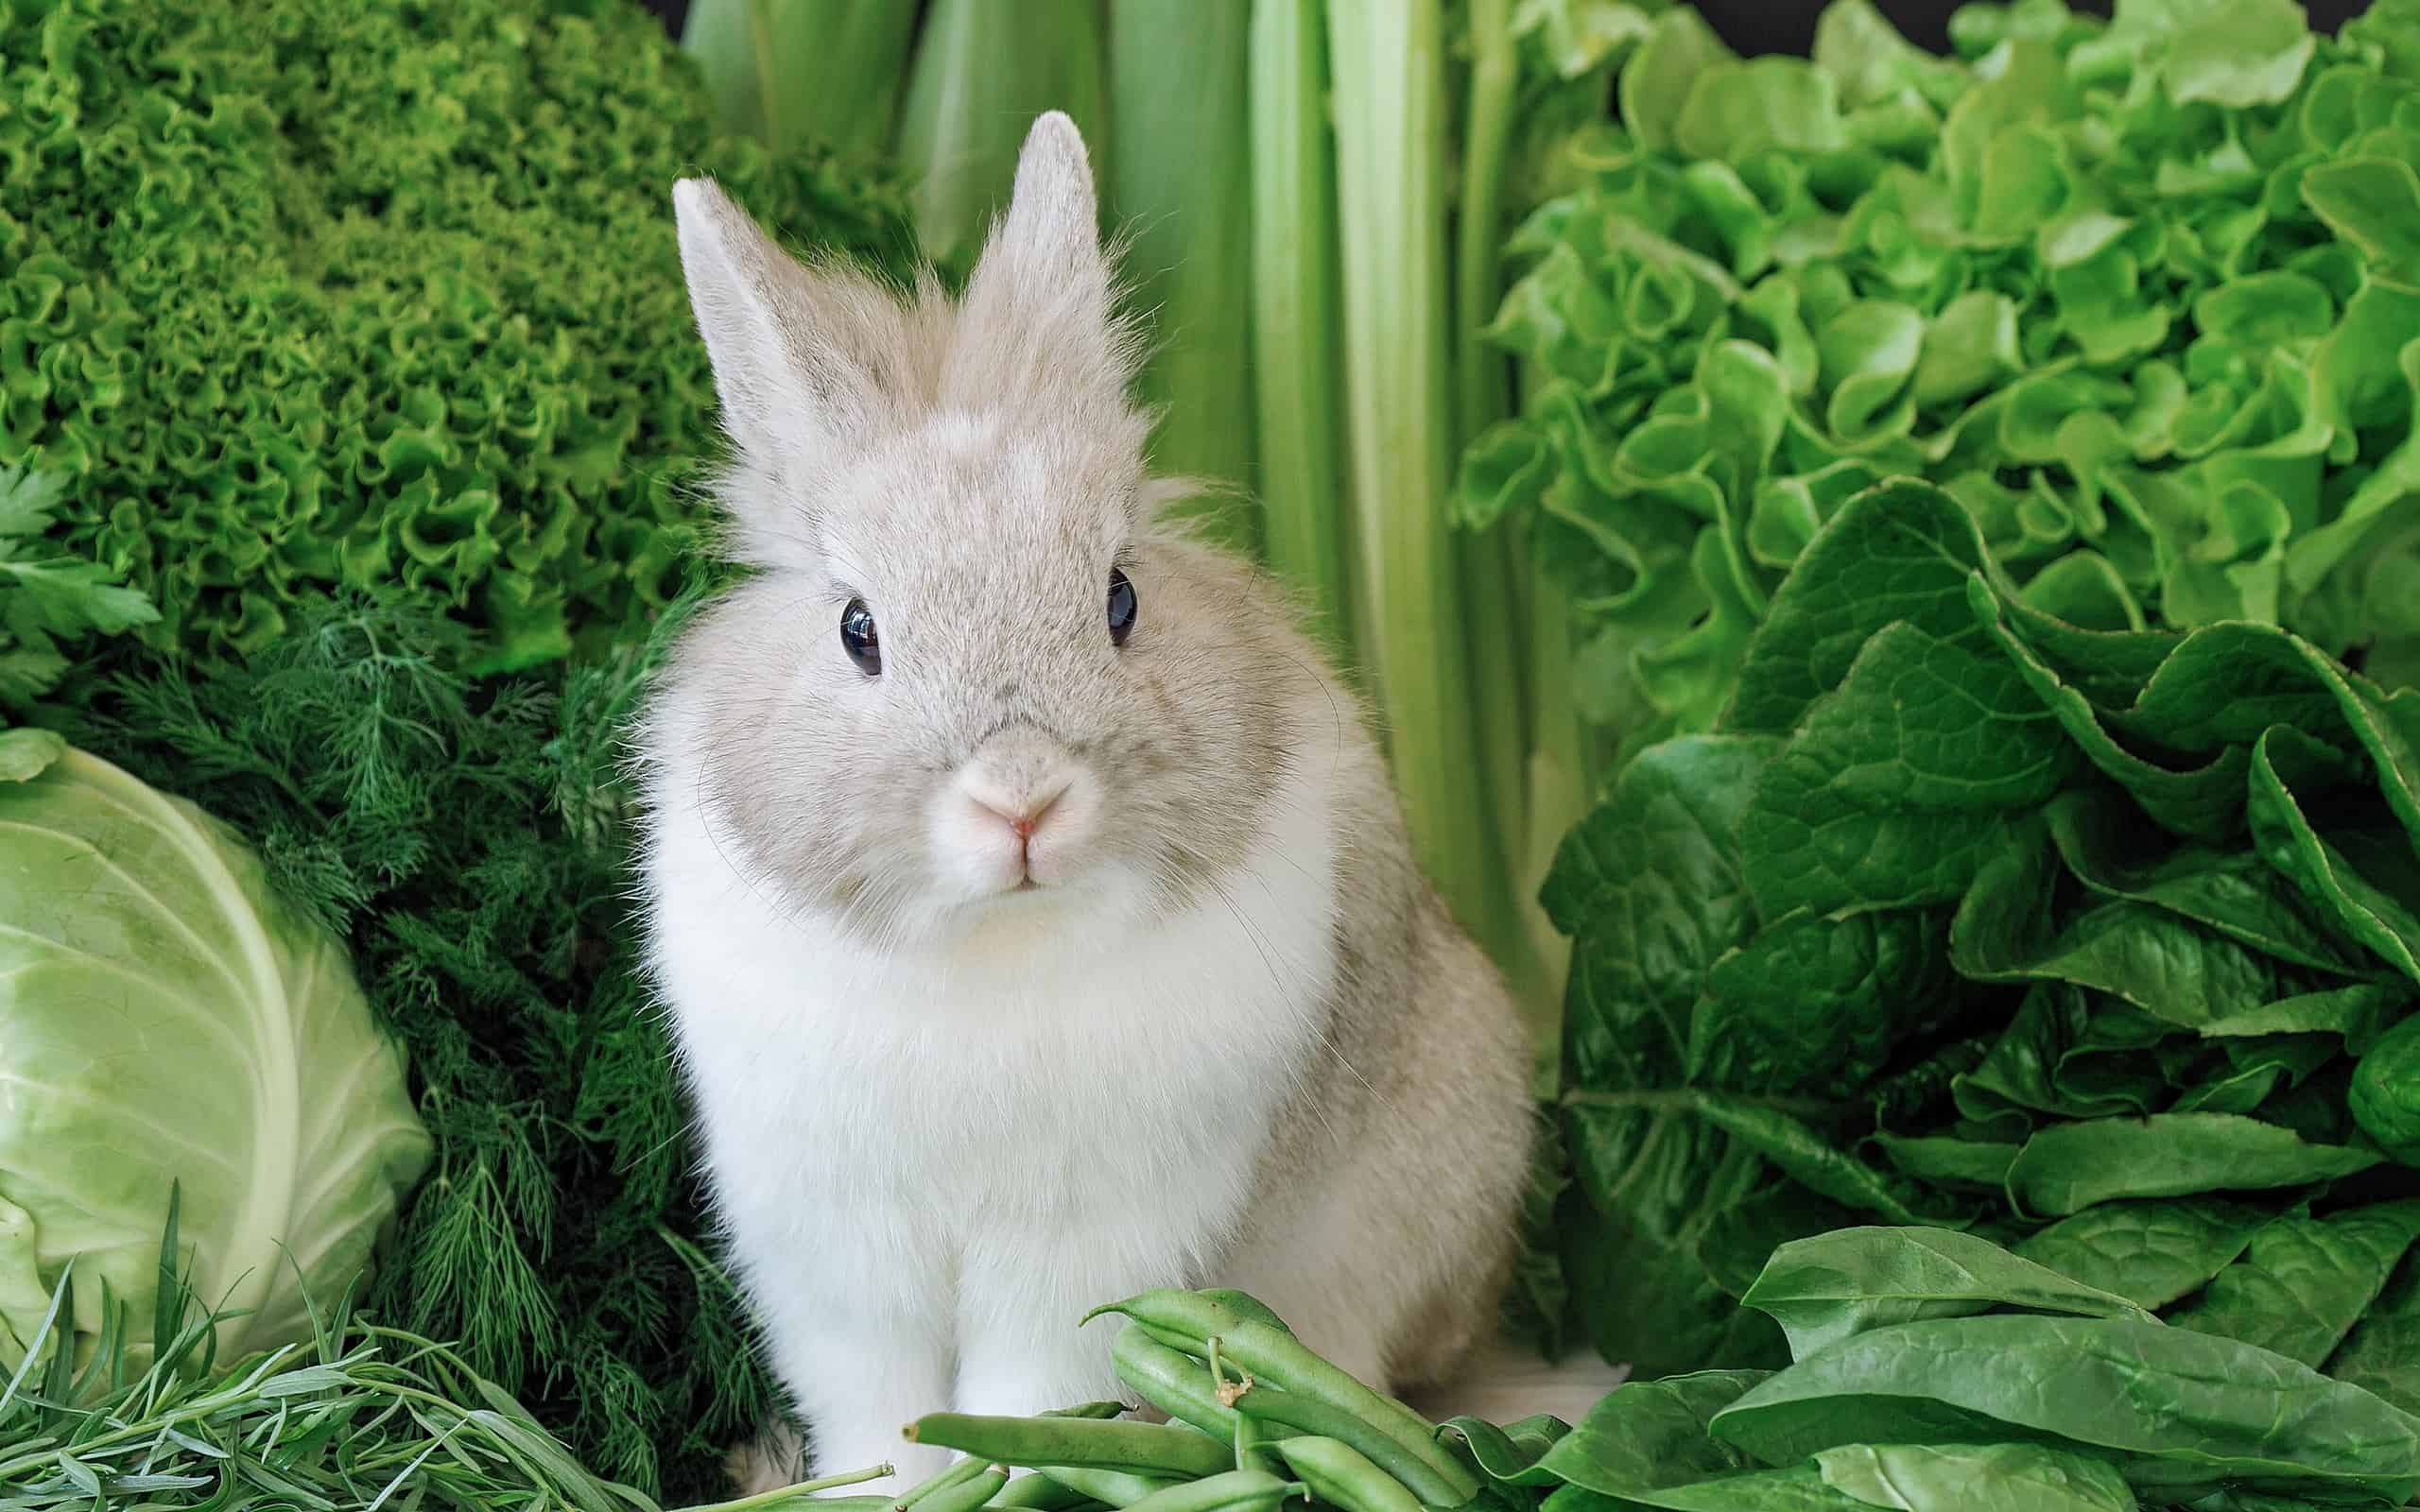 Decorative Rabbit on a Greens Background. Cute Fluffy Bunny Sits in Near Romaine Lettuce Salad, Cabbage, Dill, Parsley, Oak Salad, Corn, Asparagus and Spinach. Various Natural Organic Food For Vegans